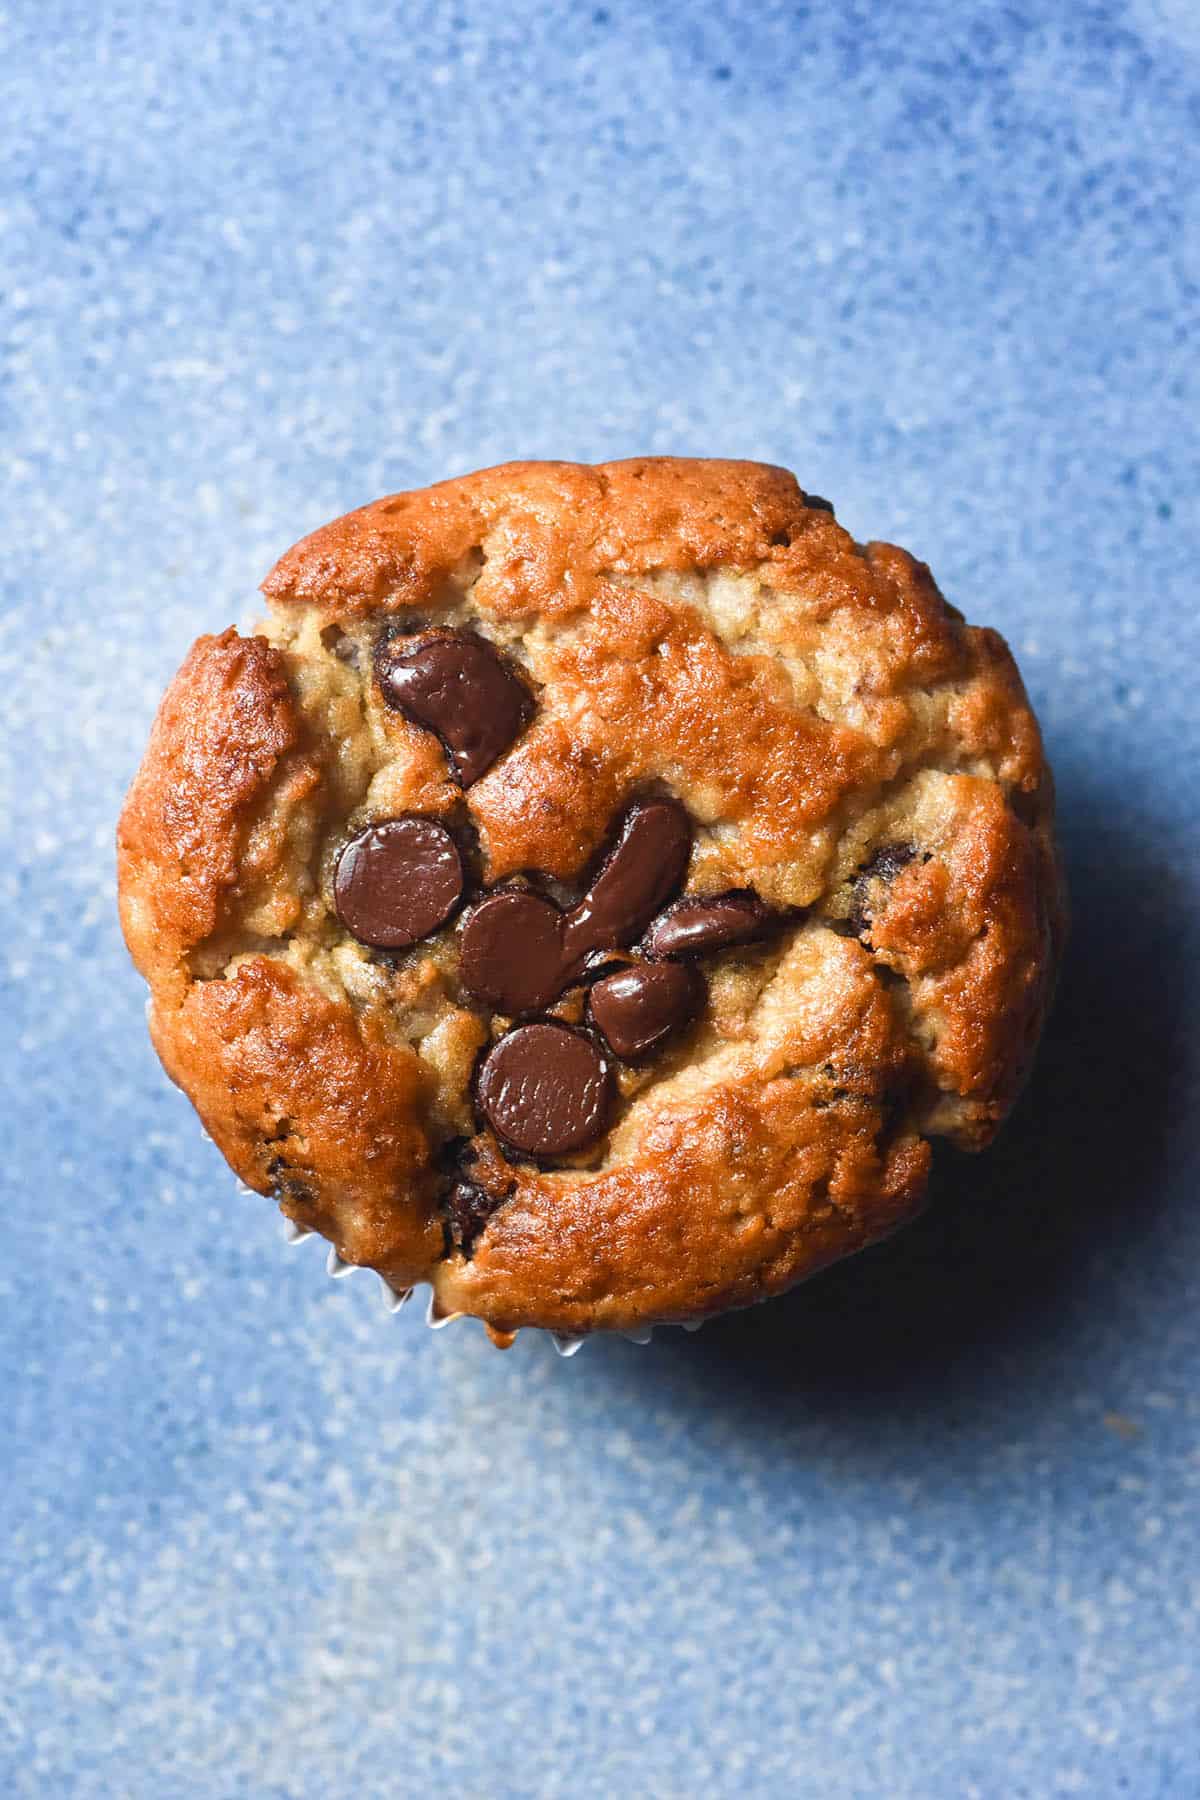 An aerial image of a gluten free banana choc chip muffin on a bright blue ceramic plate. The muffin is golden brown and studded with dark chocolate chips. 